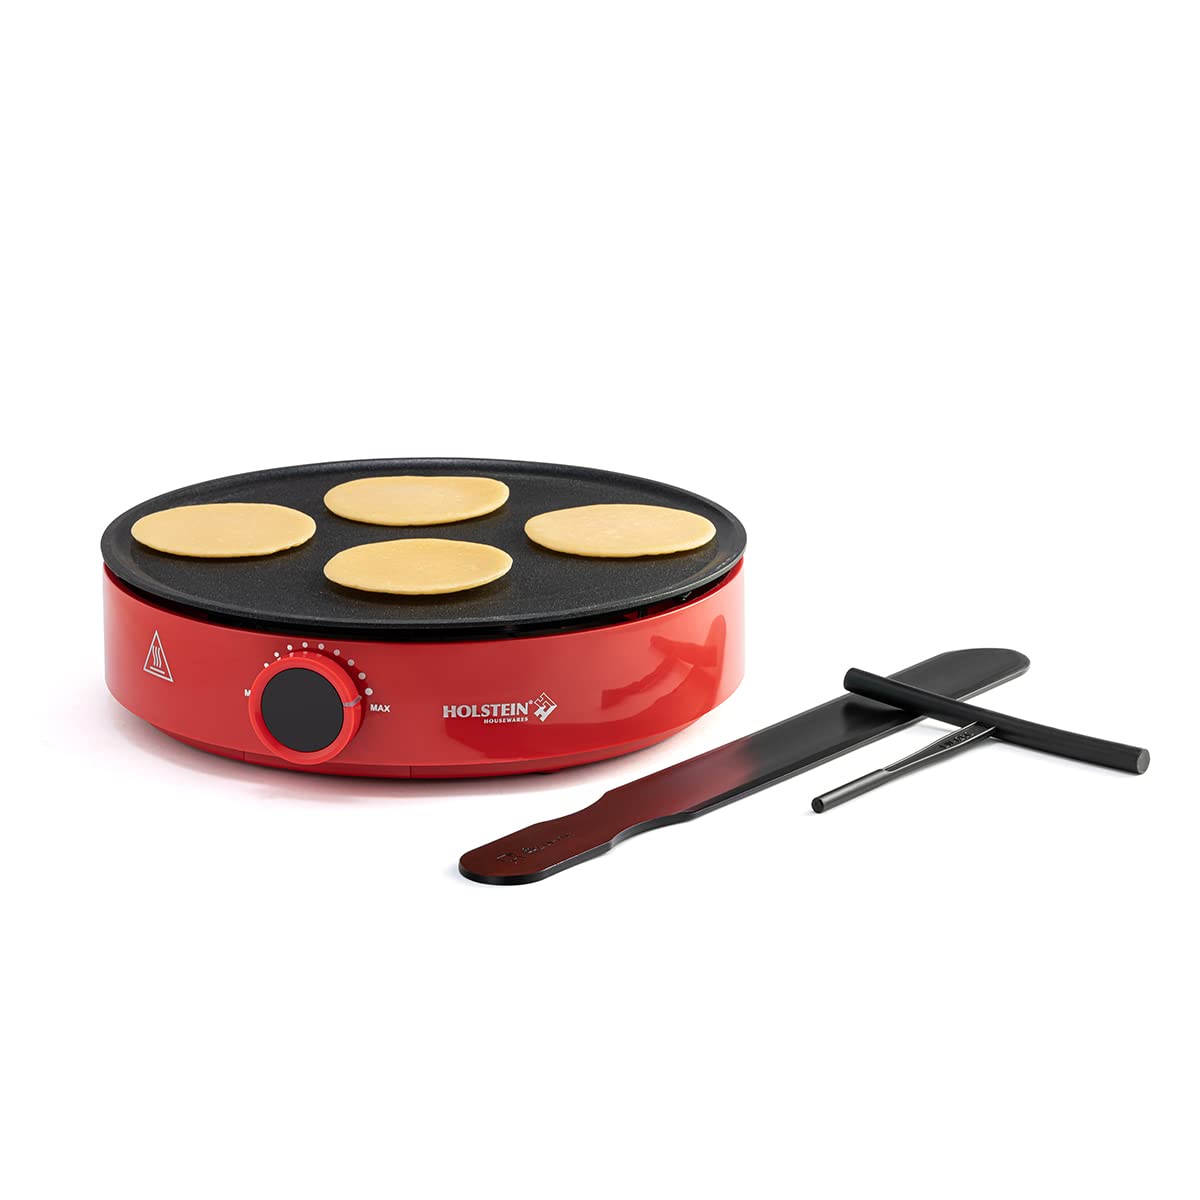 Holstein Housewares 12” Crepe Maker - Adjustable Temperature Control - Nonstick Griddle for Versatile Cooking of Crepes, Blintzes, Pancakes, Eggs, Bacon & More - Easy to Clean - Indicator Lights